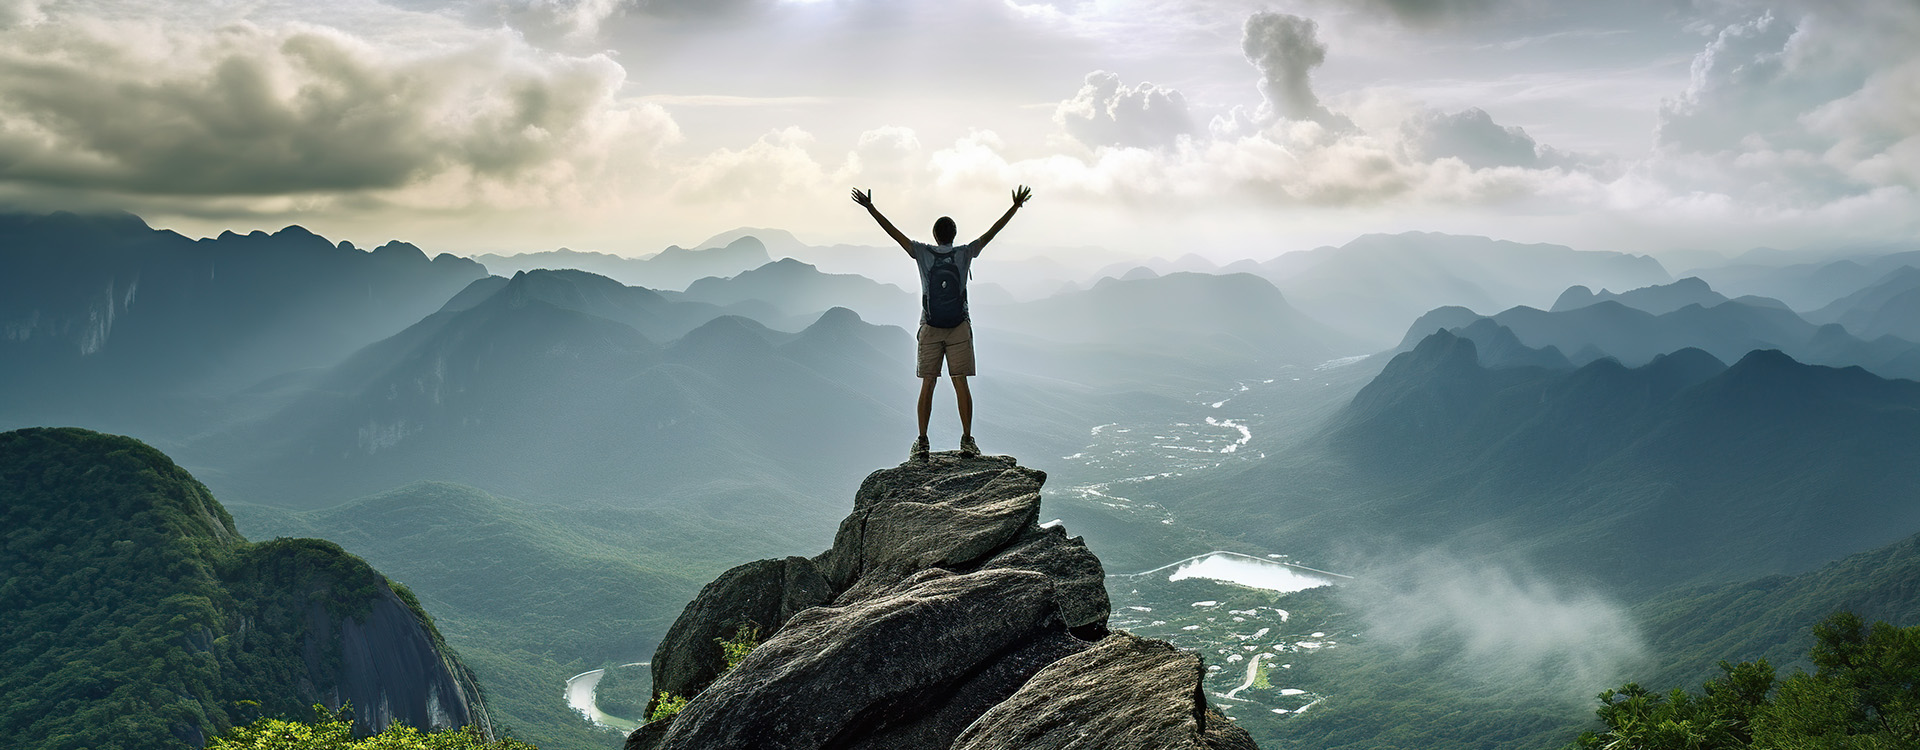 a hiker celebrating reaching the top